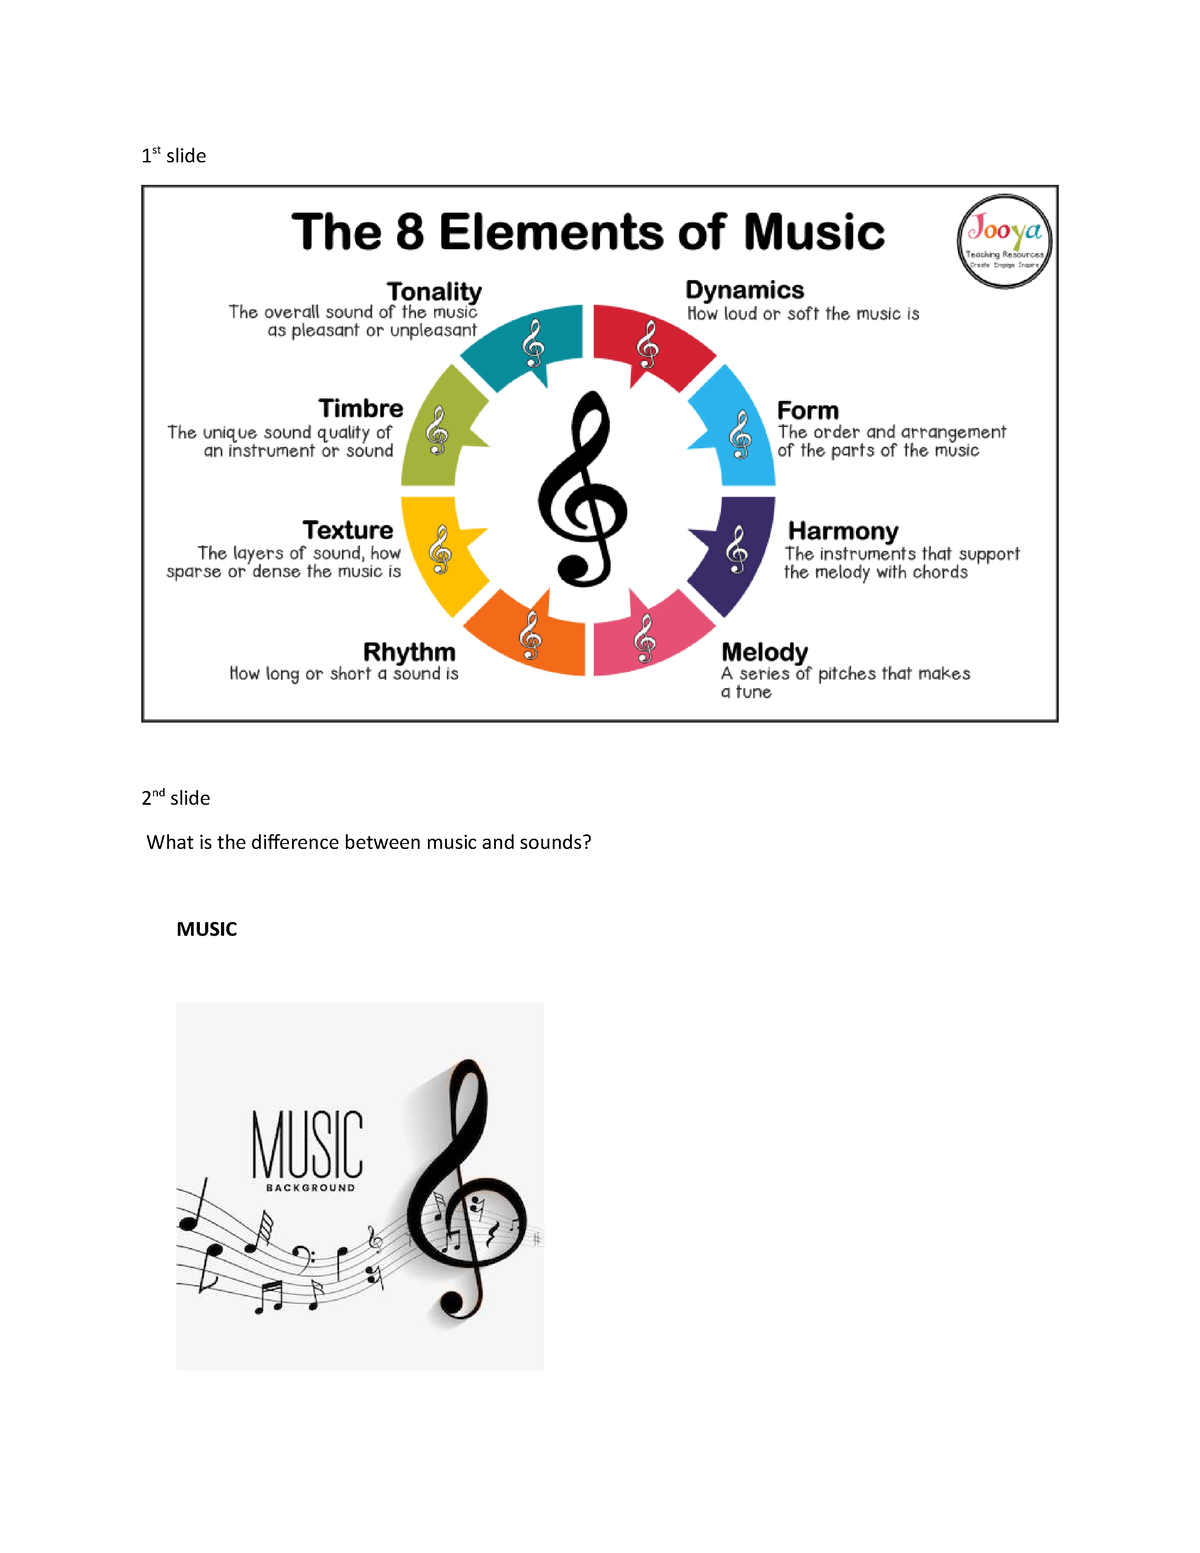 elements-of-music-1-st-slide-2-nd-slide-what-is-the-difference